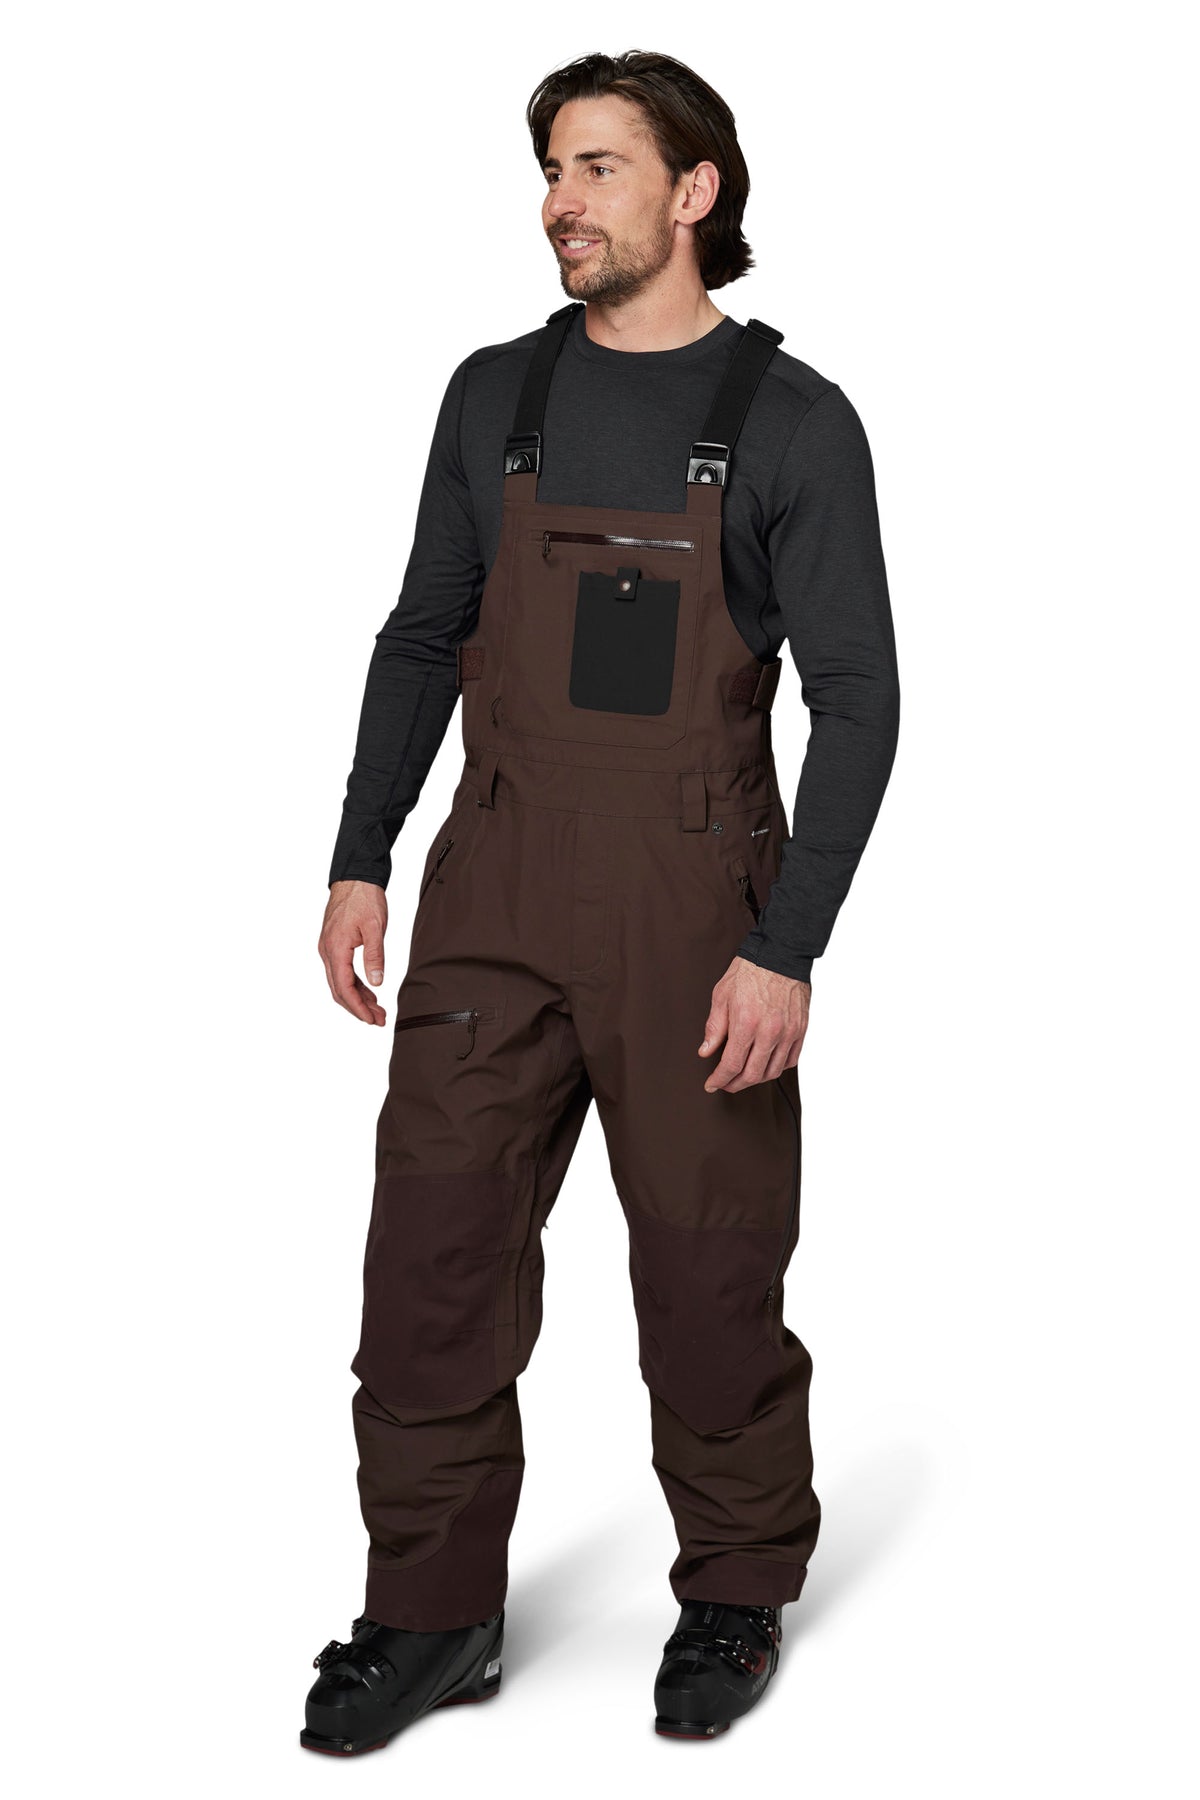 Outbound Men's Copper Thermal Insulated Waterproof Ski Snow Pants Bib  Overalls, Black